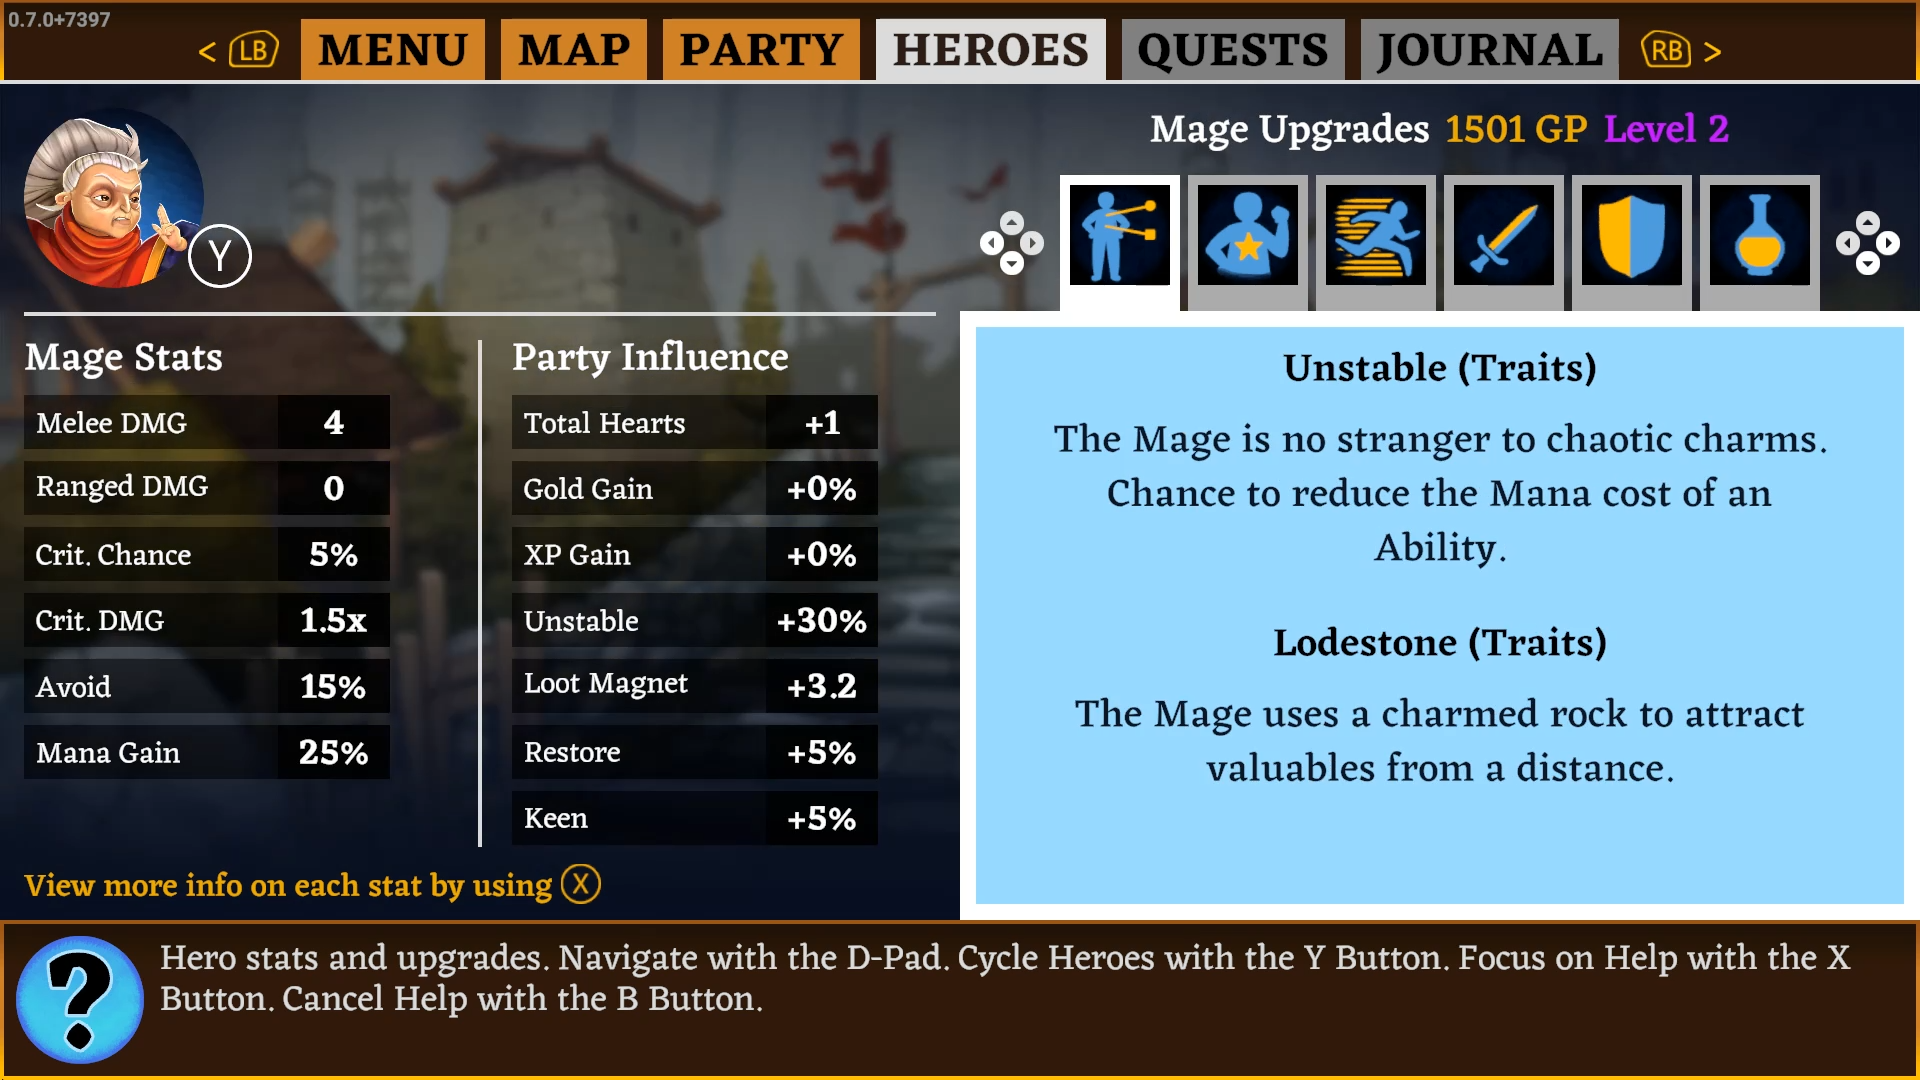 The Heroes stats screen showing the Mage' character traits